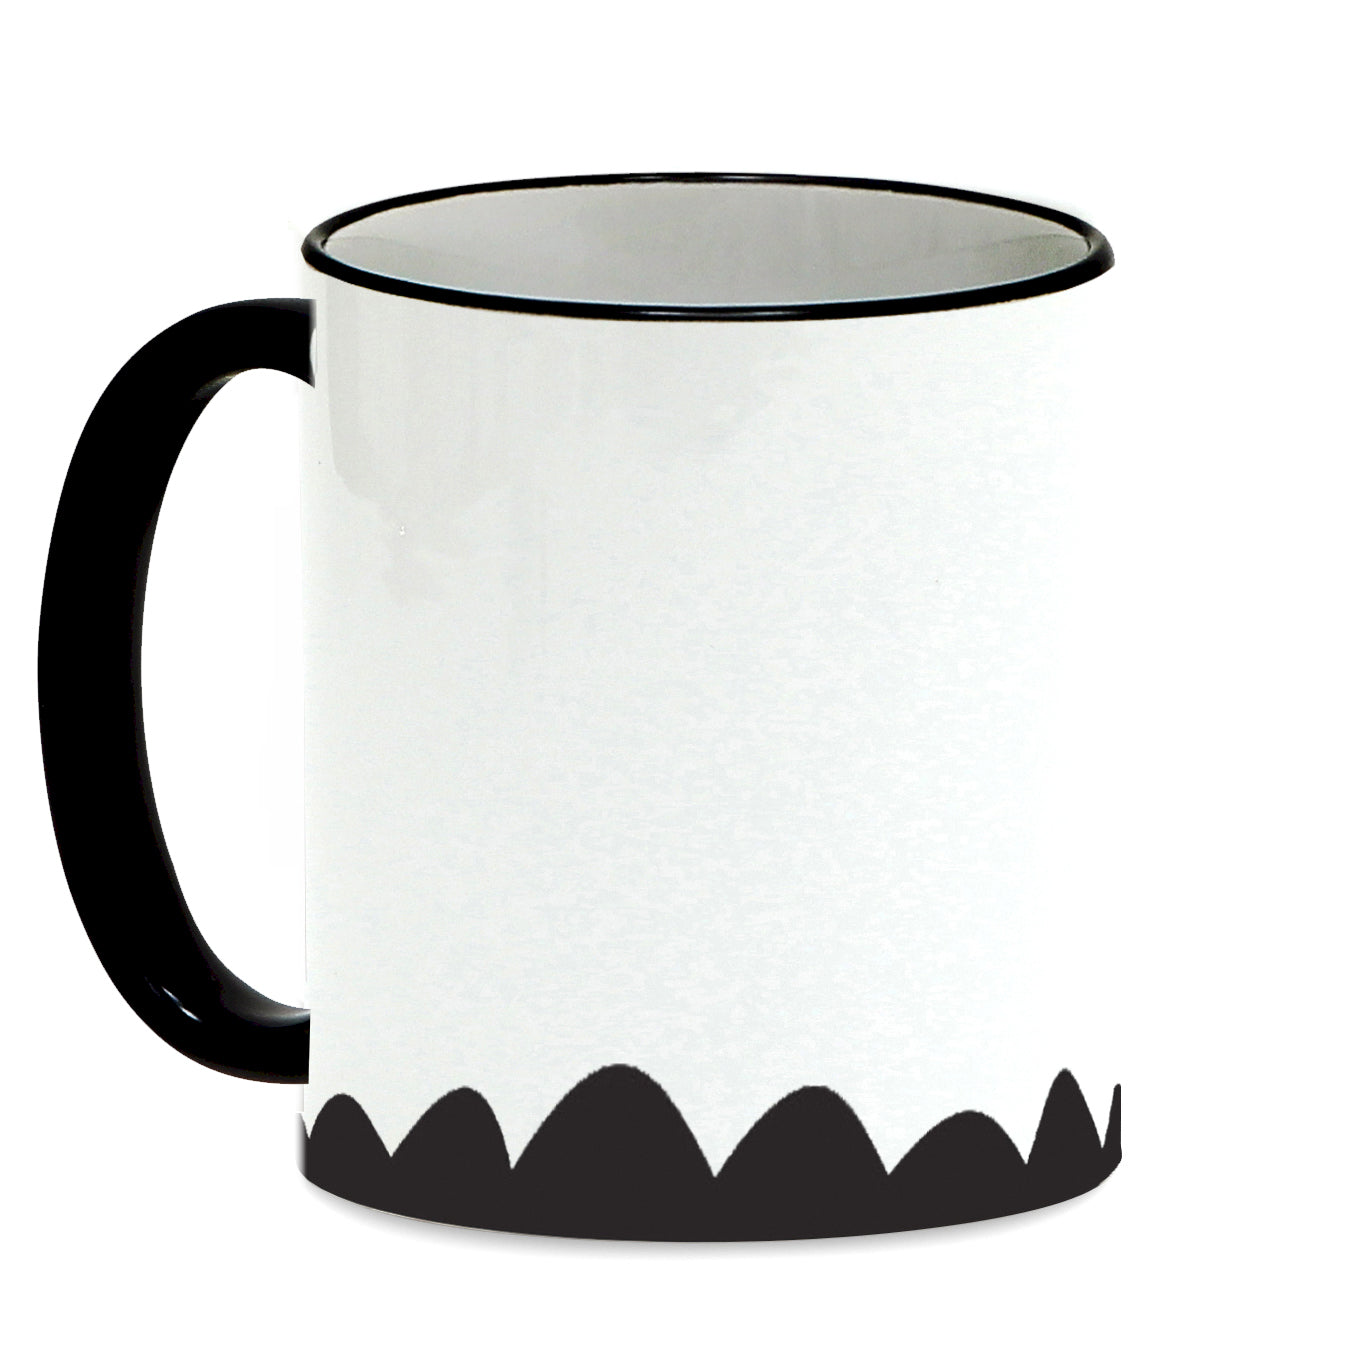 SUBLIMART: Lineart - Mug with black handle and rim featuring hand drawn line drawings. (Design #27)